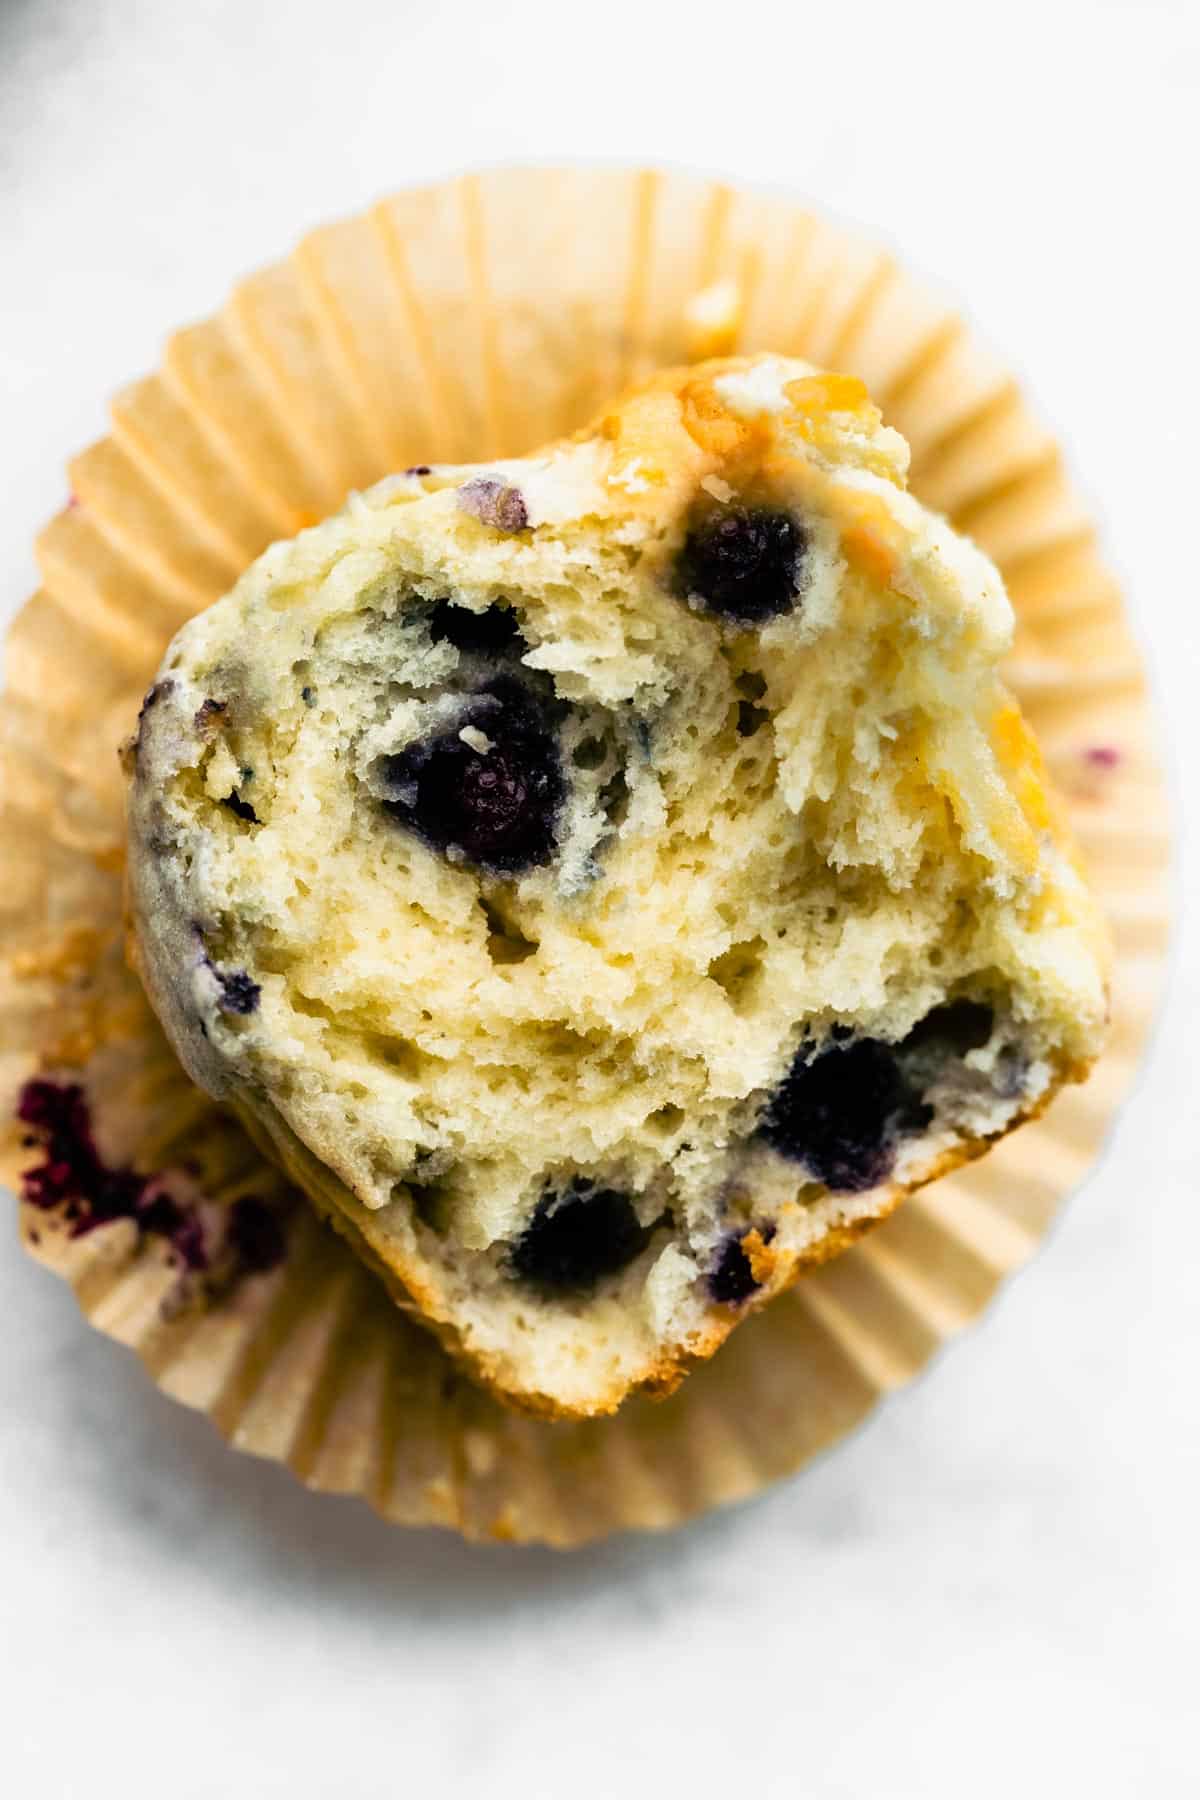 A gluten free blueberry muffin on top of a muffin wrapper with a bite missing.